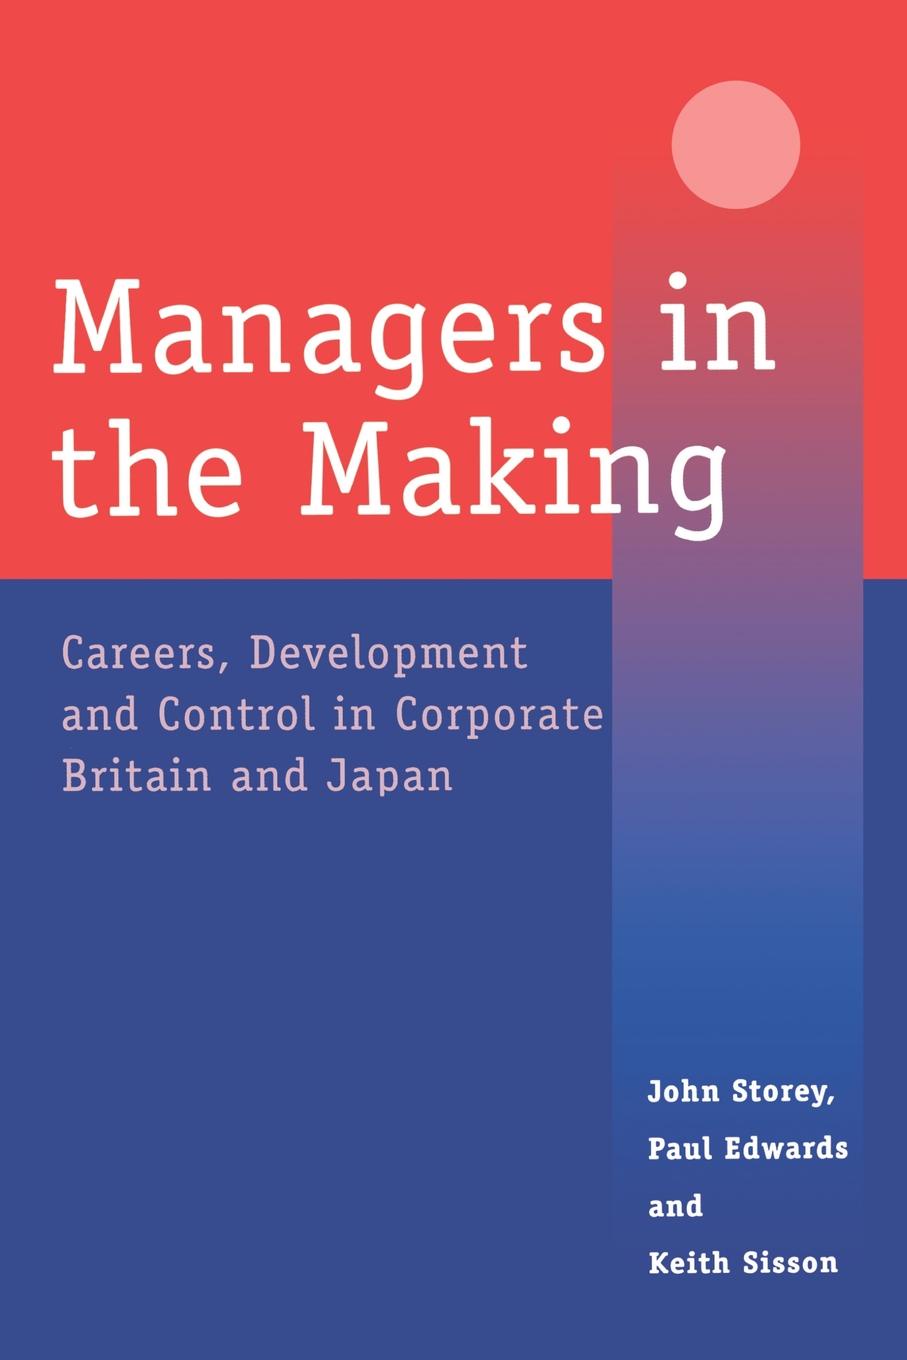 Managers in the Making. Careers, Development and Control in Corporate Britain and Japan